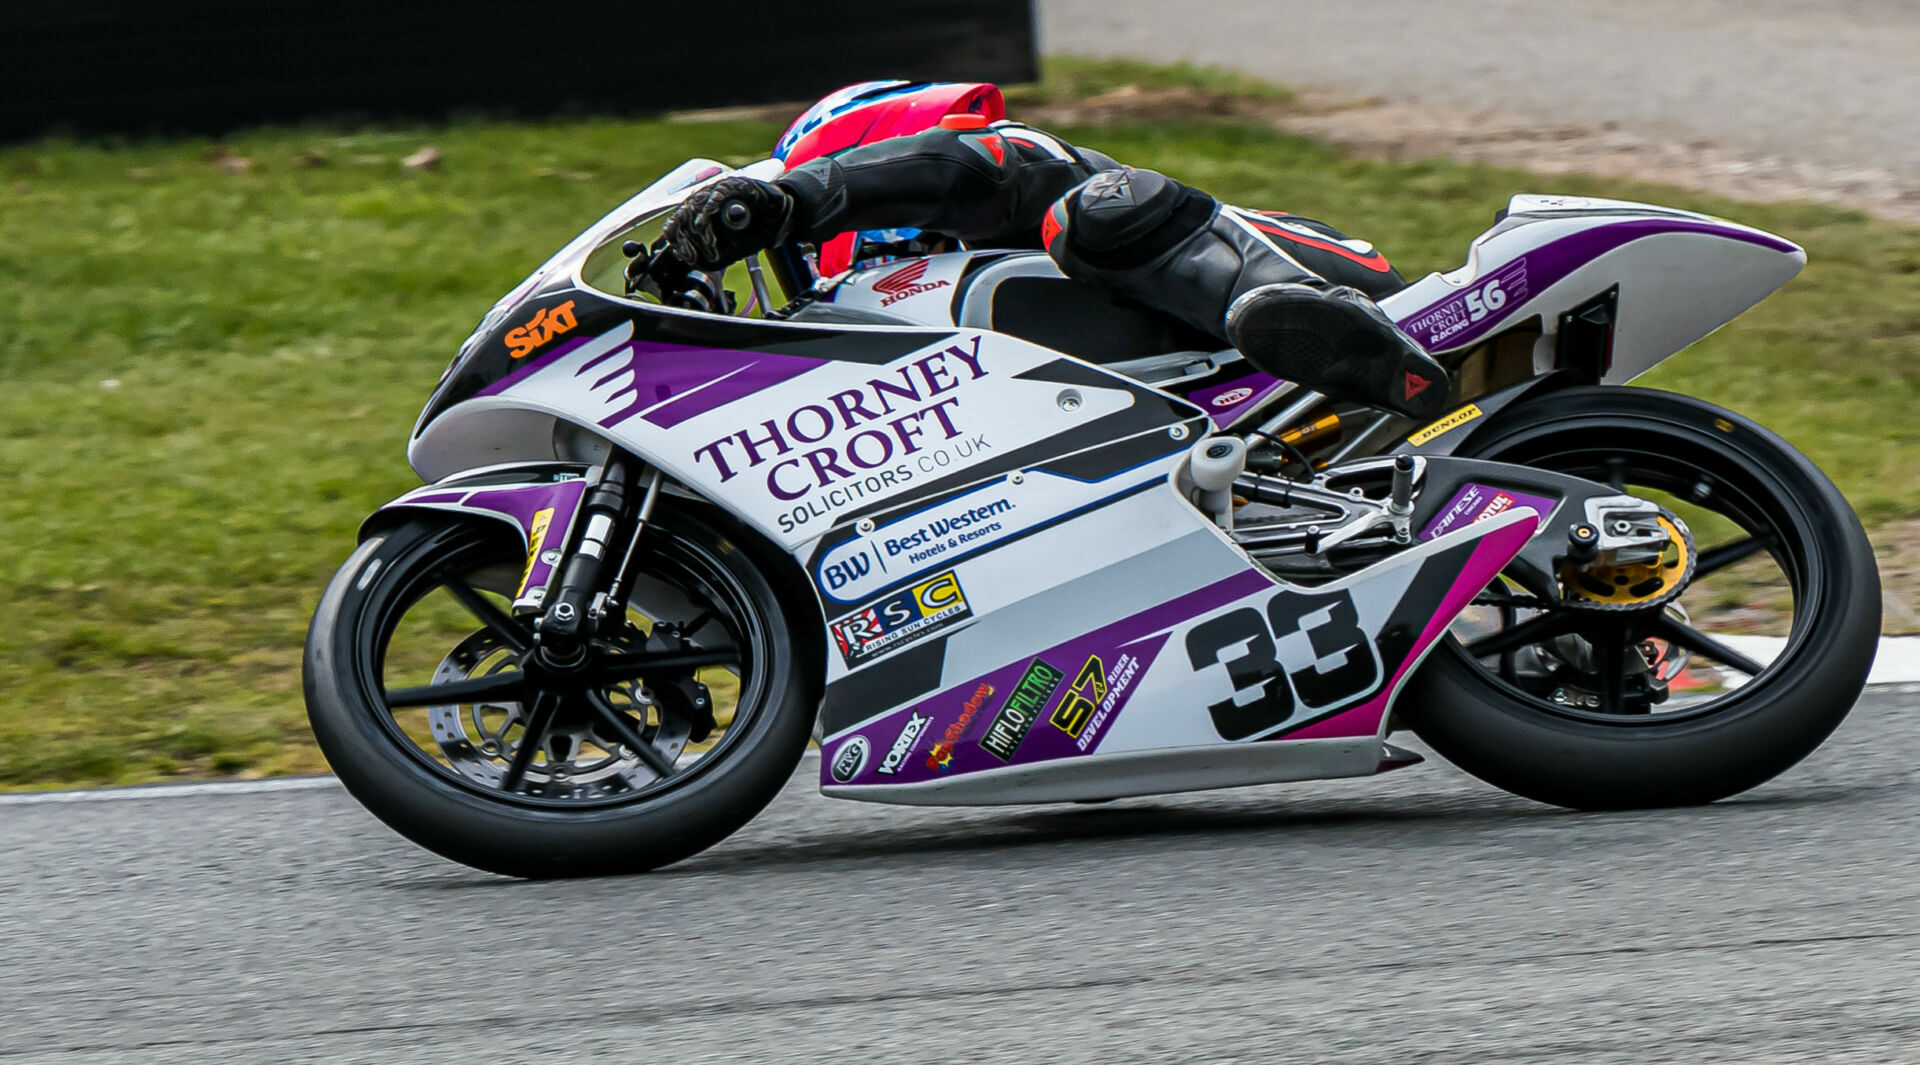 Eli Banish (33) in action during a British Talent Cup event in 2022. Photo by Barry Clay.